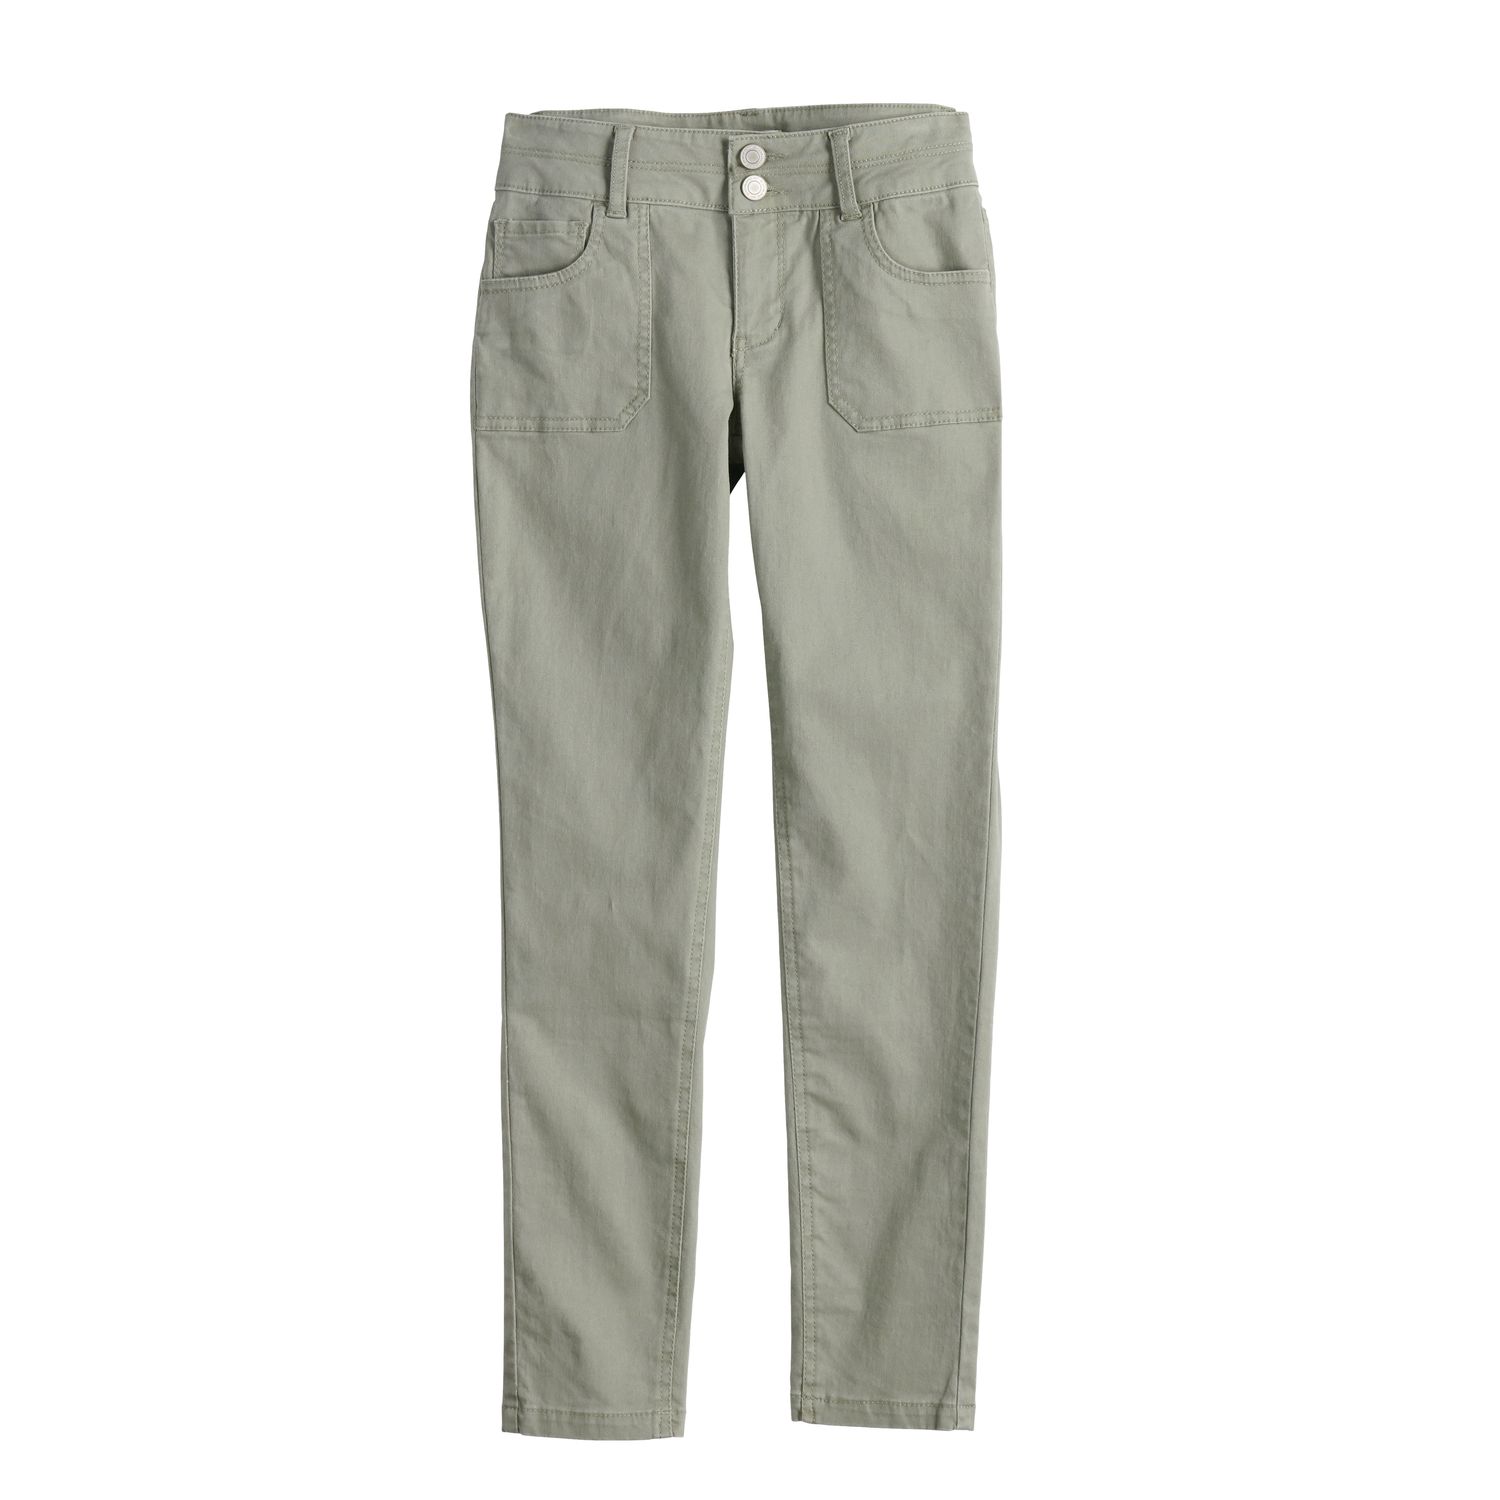 plus size olive green jeans